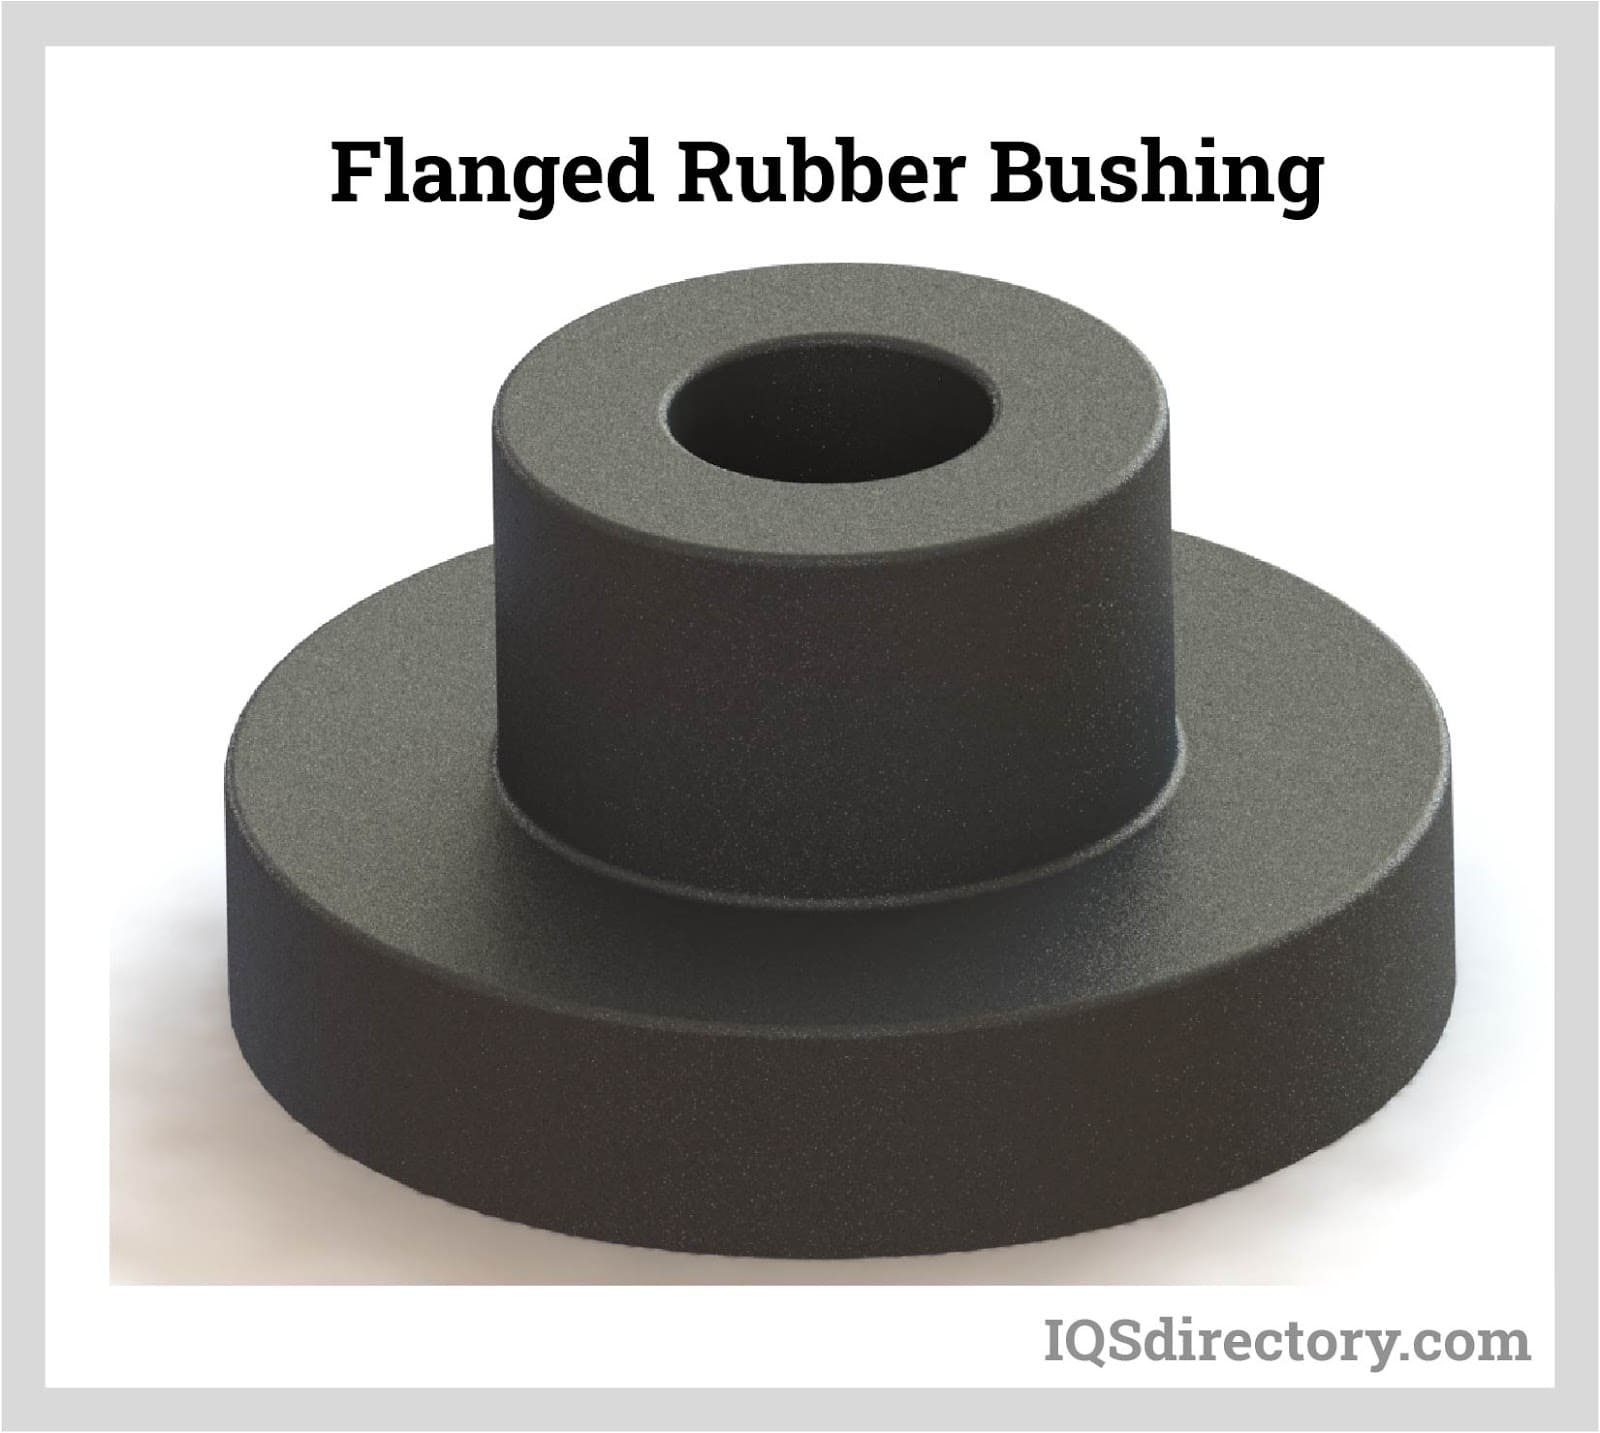 Flanged Rubber Bushing